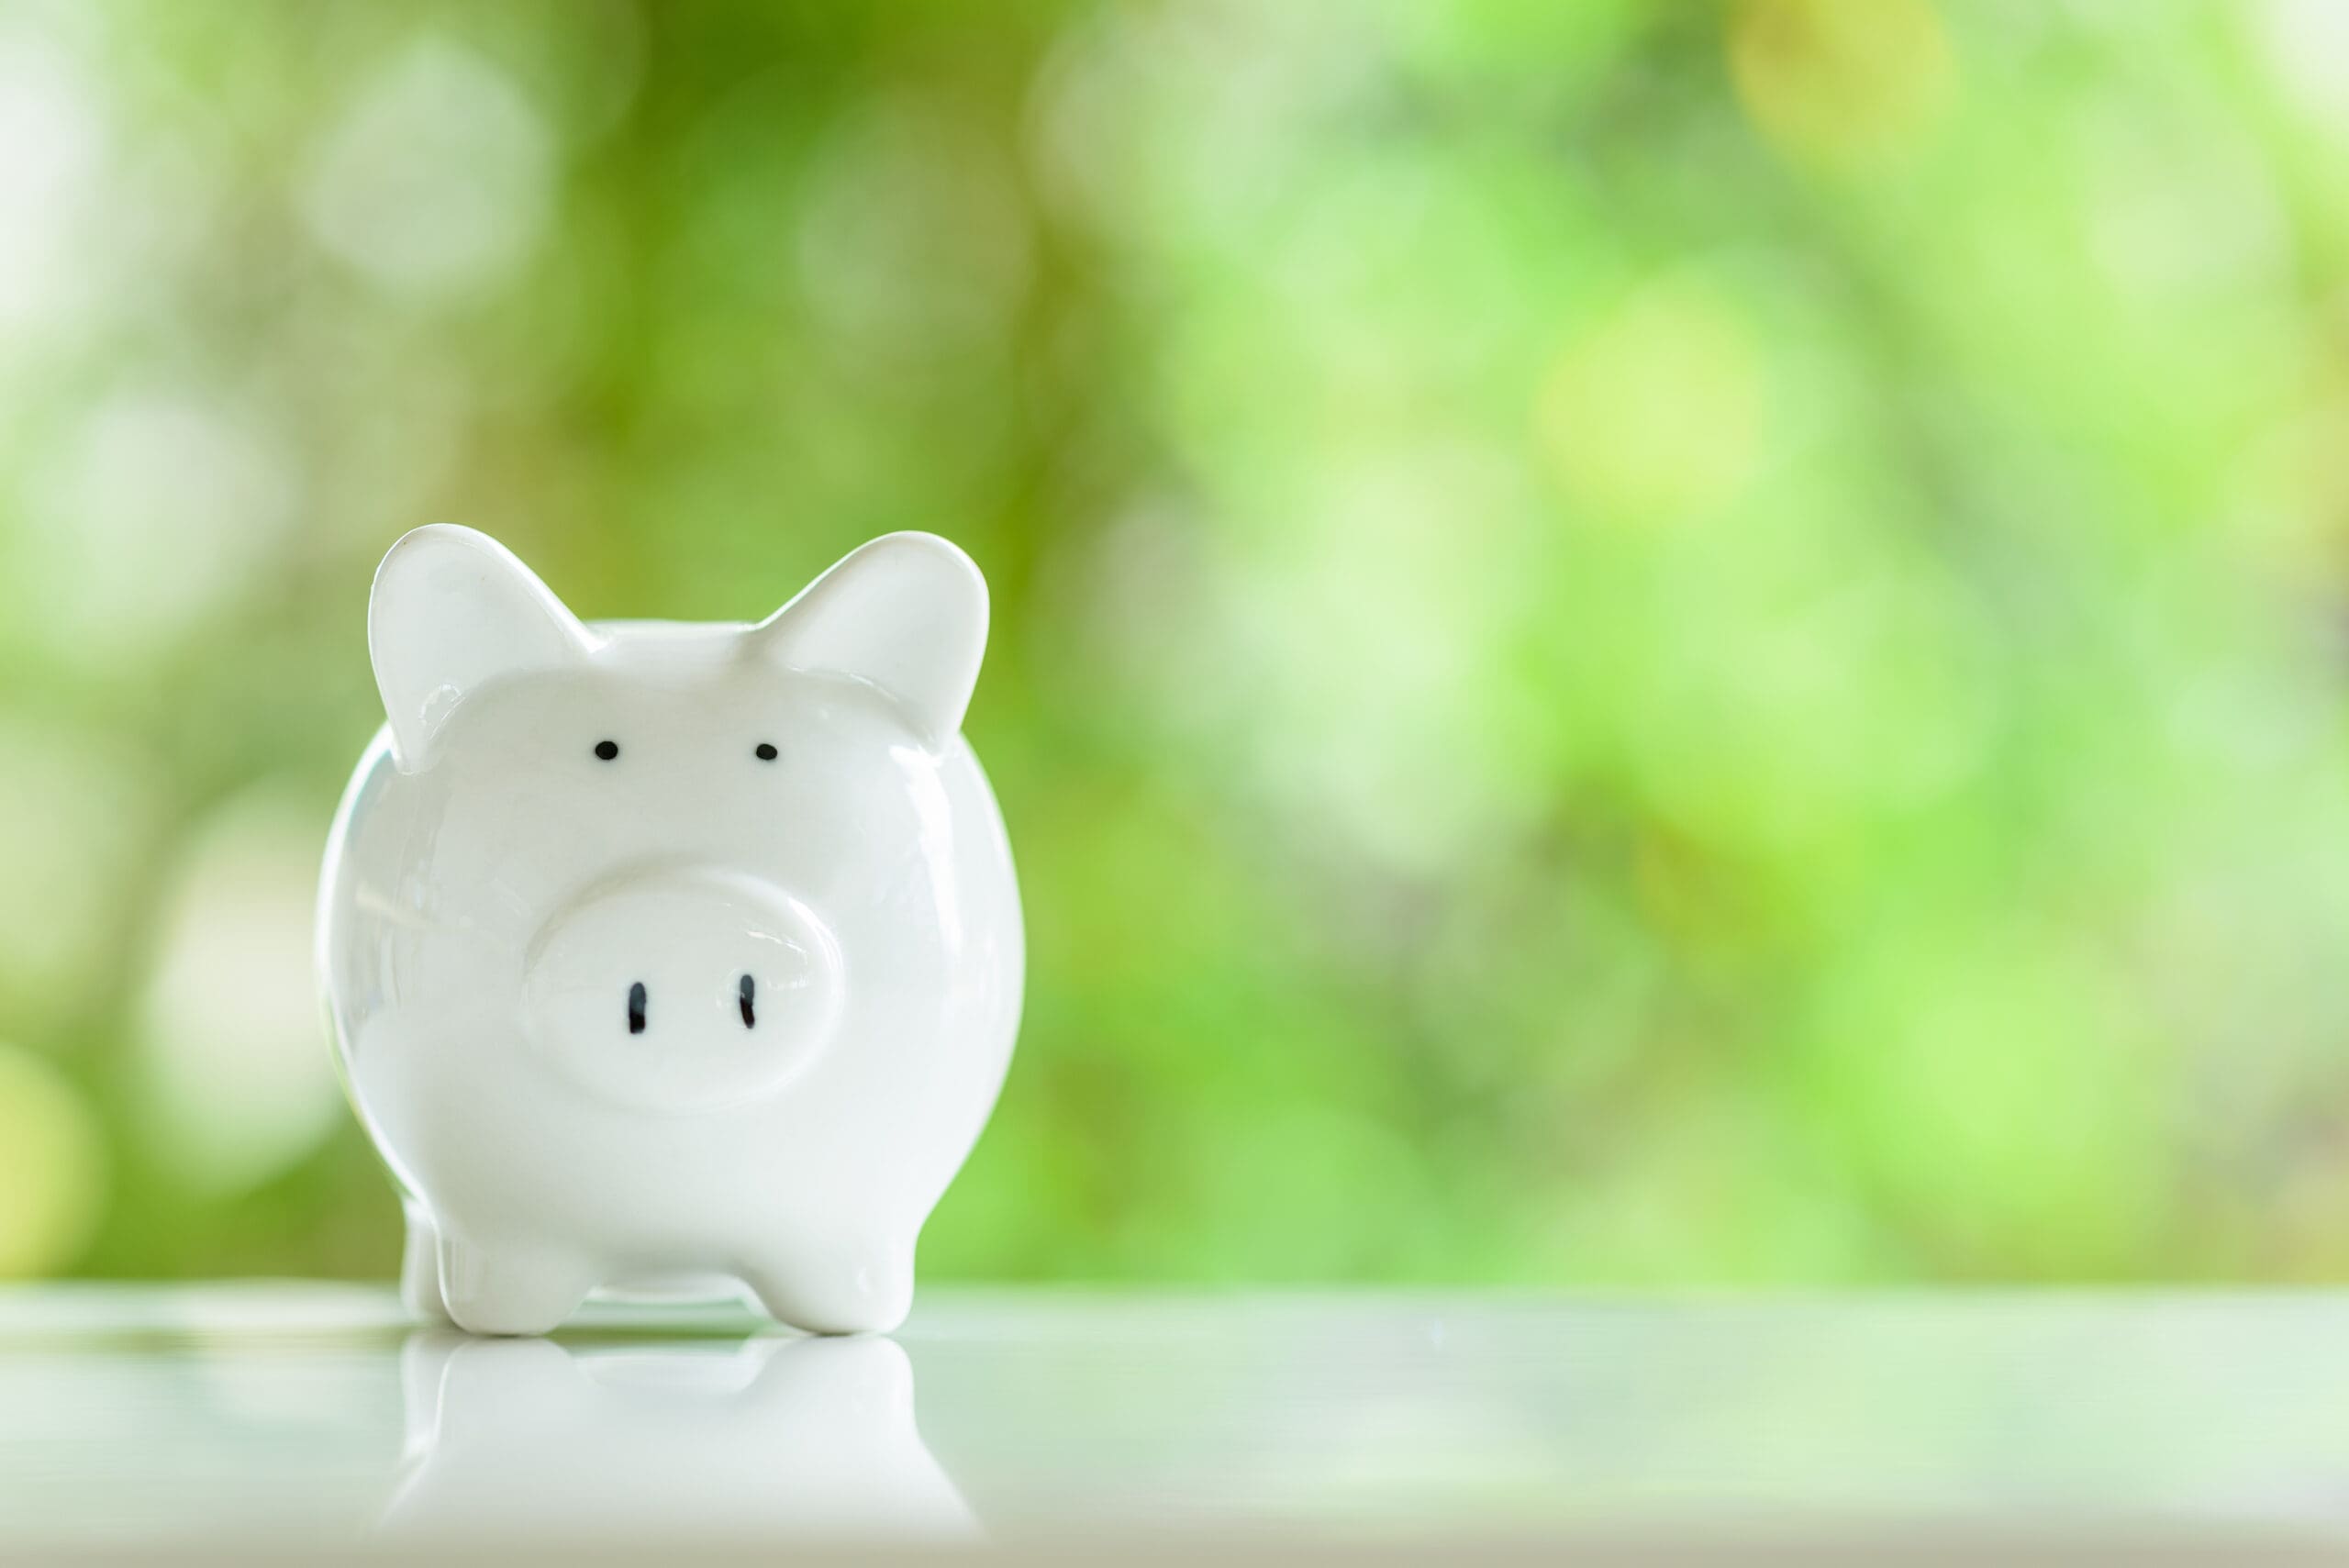 Minor children savings account, financial concept : White ceramic piggy bank on a table with a green bokeh background. The image depicting a type of saving account deposit for child education, allow deposit money from kids for brighter future.